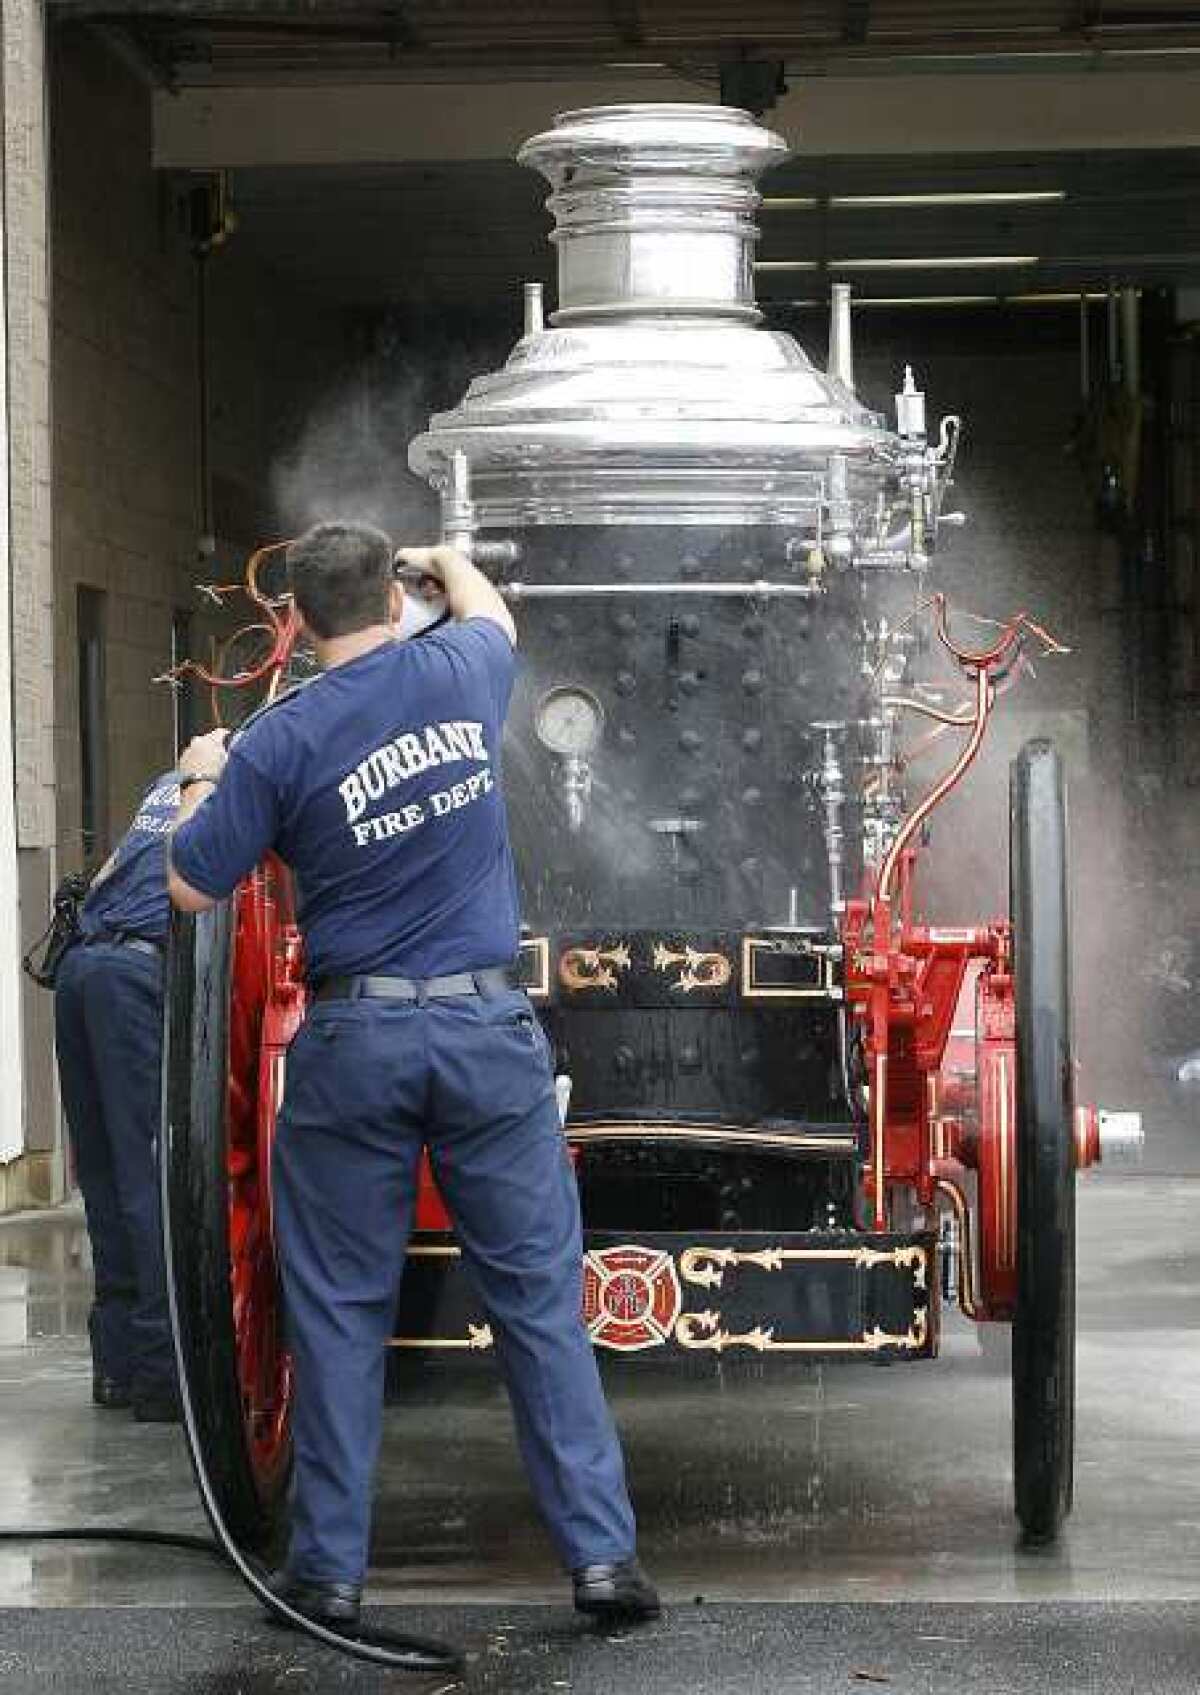 Burbank firefighters clean a working 1915 Christie Steamer on Monday, April 15, 2013, in preparation for Fire Service Day in May. The steamer will be demonstrated during the family-friendly day.